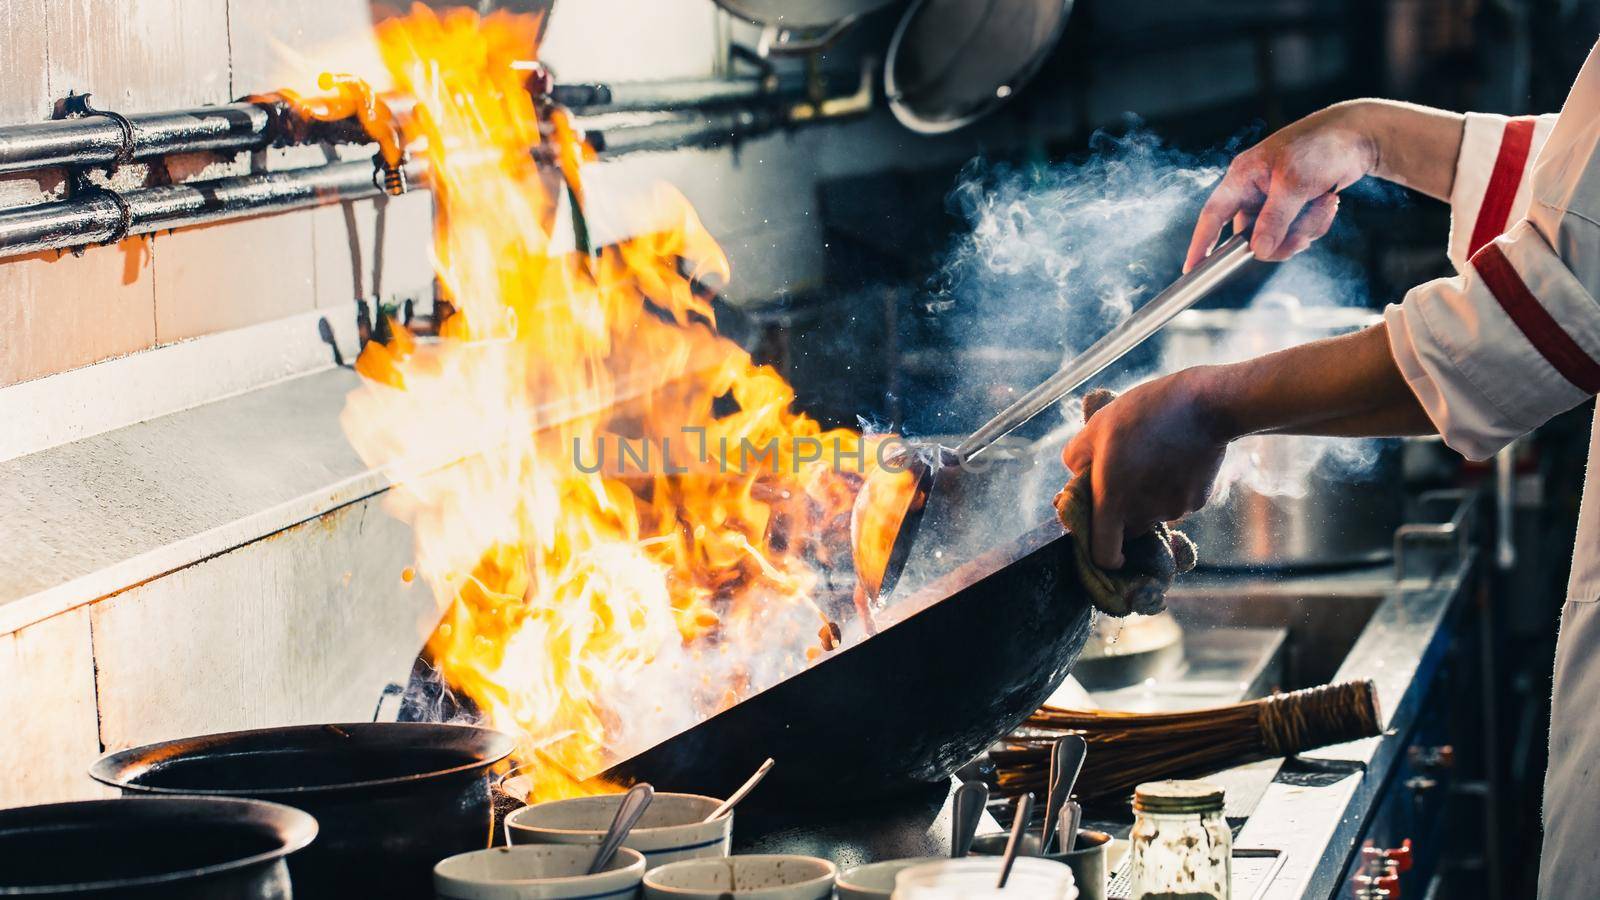 Chef stir fry cooking in kitchen, Professional chef fire cooking of restaurant, Street food cooking style